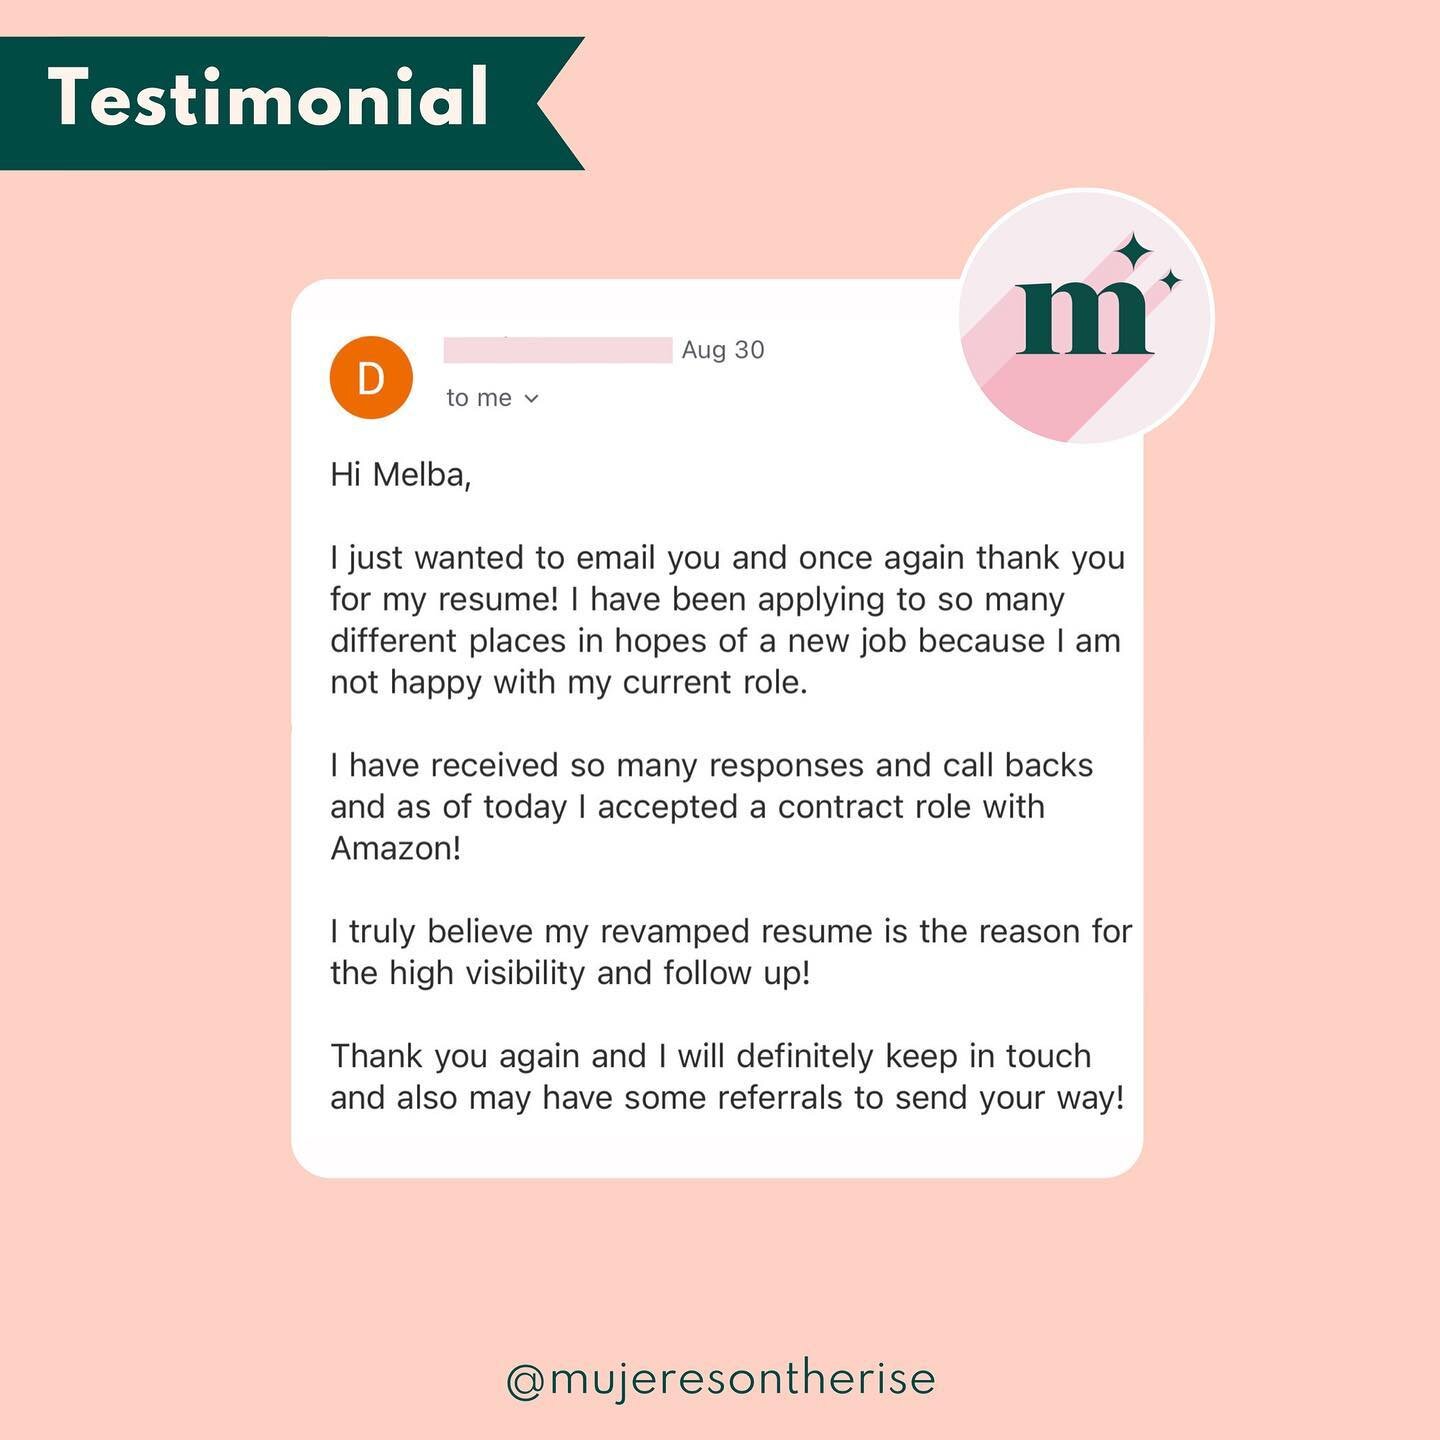 Our favorite kind of emails. ❤️
&mdash;
This resume was completed on Aug 10, and in just ~20 days, our client has already accepted a new offer!! How incredible is that?! 😌 We are so happy for you, Dani. Thank you for letting #MujeresOnTheRise be par